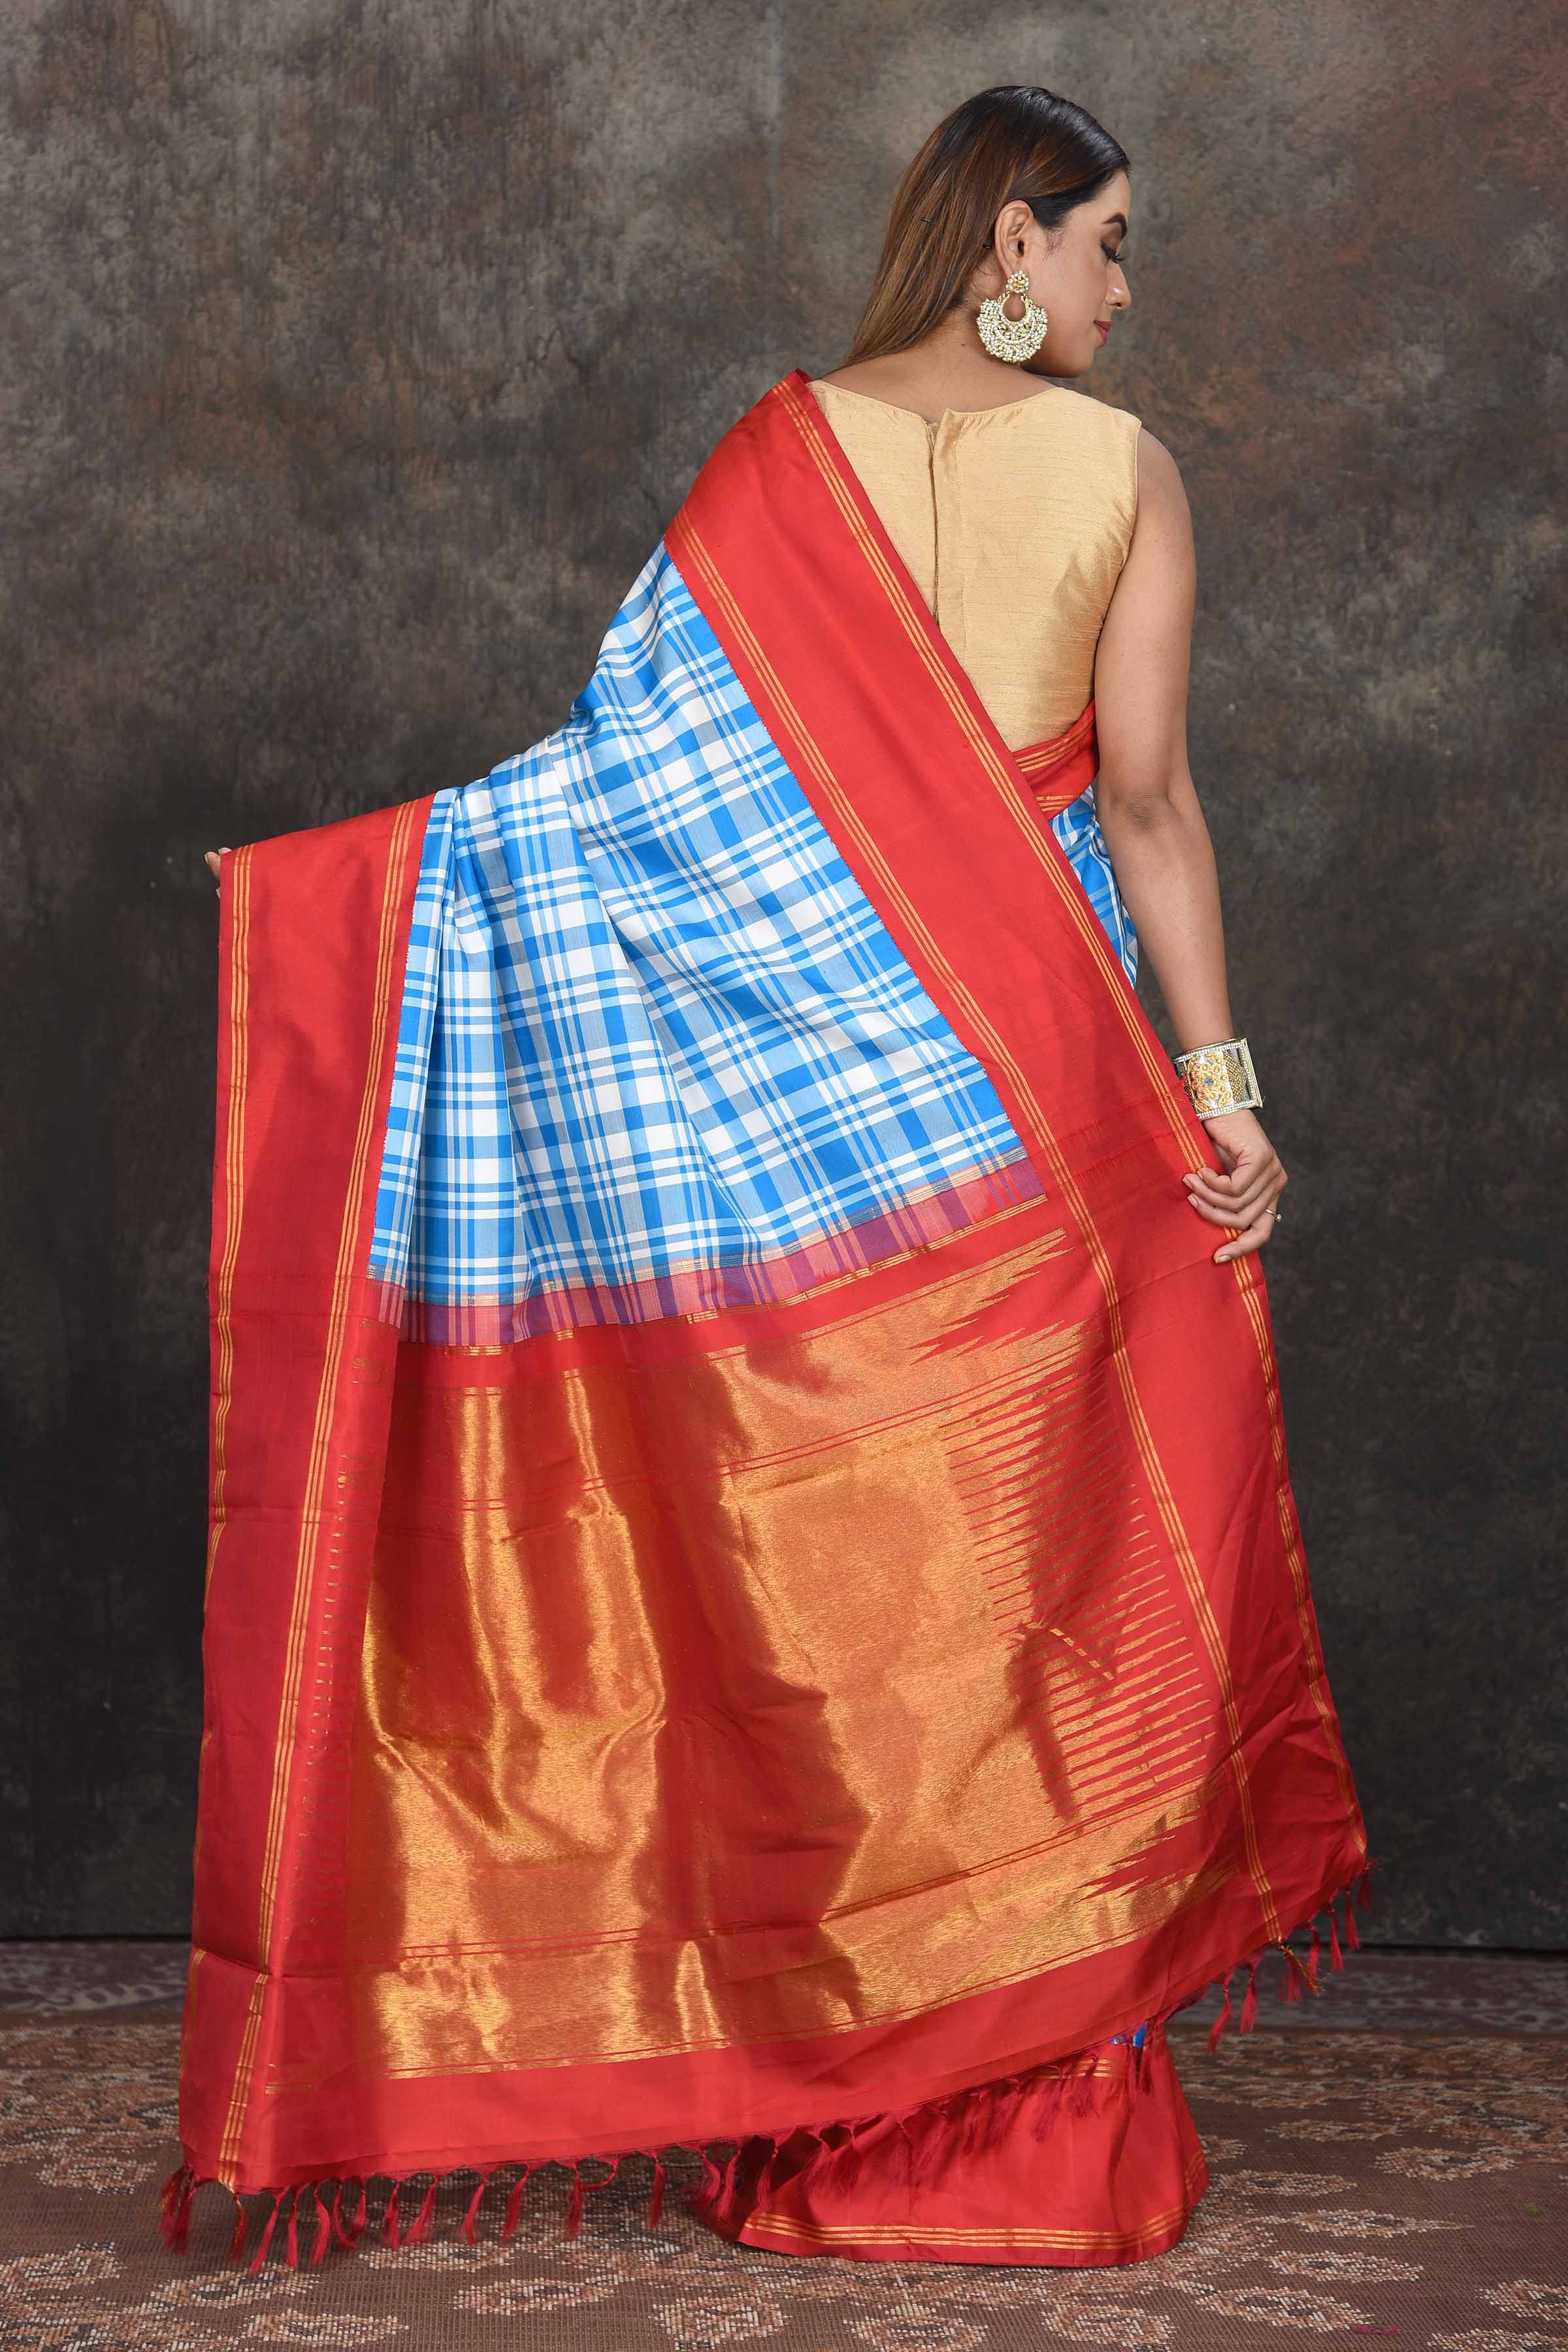 Buy beautiful white and blue check Kanjeevaram sari online in USA with red zari border. Go for a rich traditional look on weddings and festive occasions in pure silk sarees, Kanchipuram silk sarees, handloom sarees, Banarasi sarees from Pure Elegance Indian fashion store in USA.-back